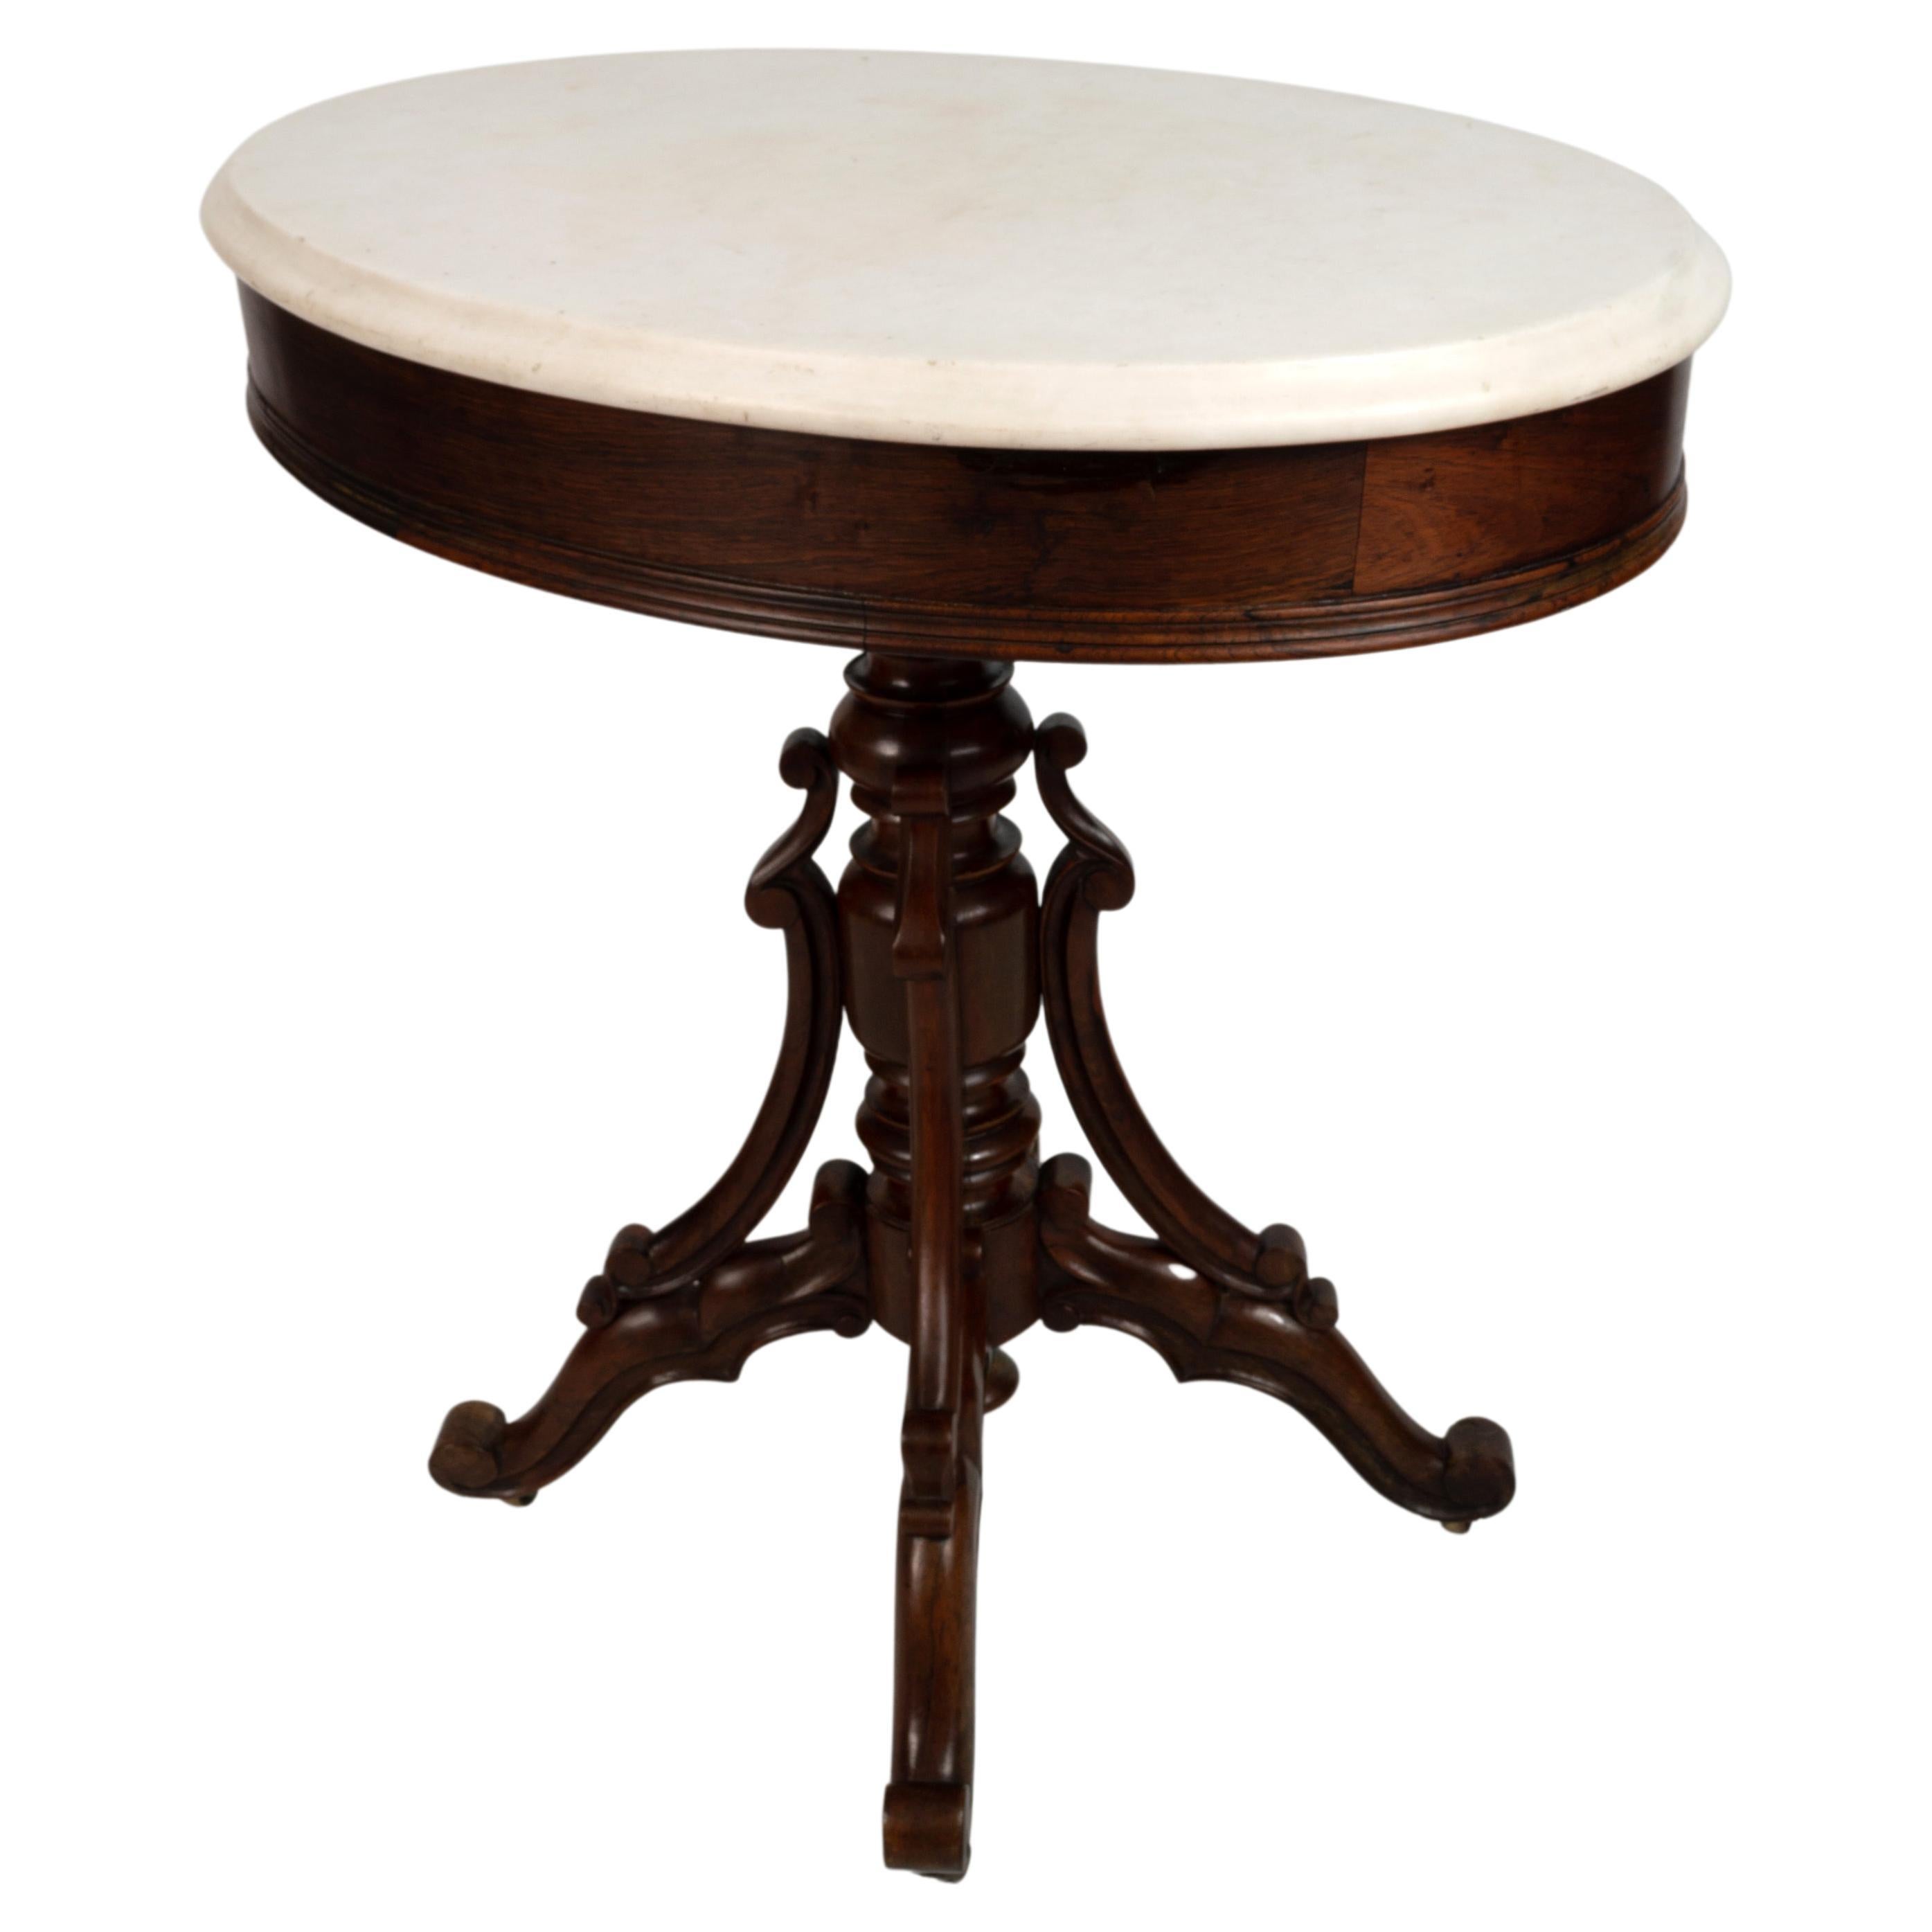 Antique French 19th Century Rosewood and Marble Oval Occasional Table C1850